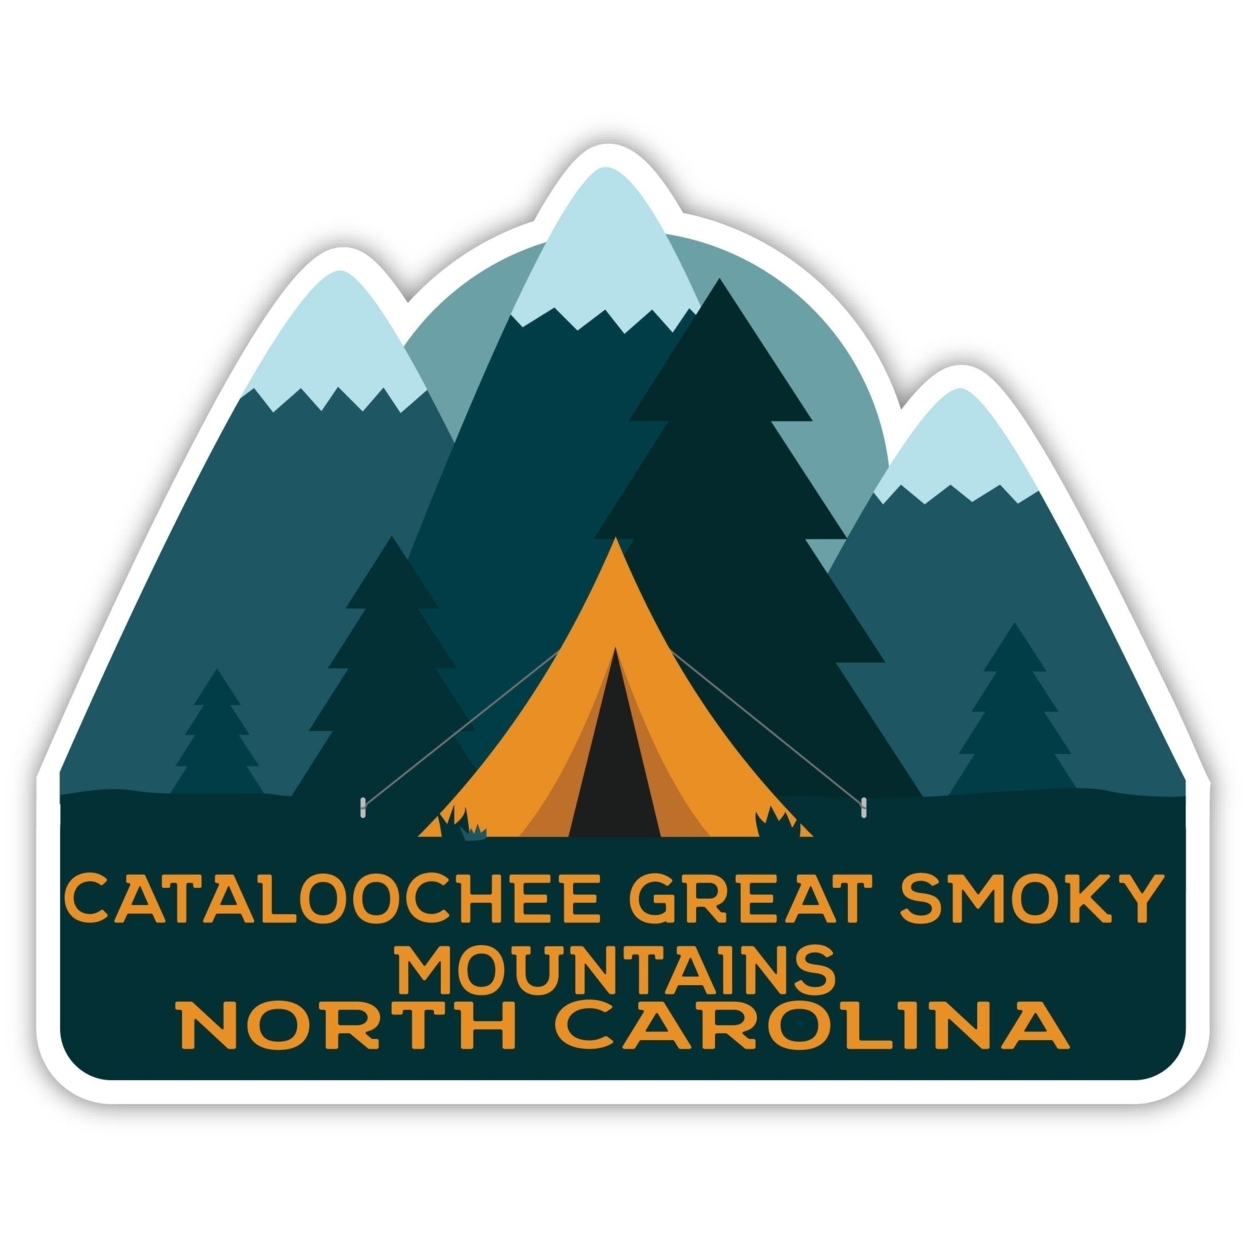 Cataloochee Great Smoky Mountains North Carolina Souvenir Decorative Stickers (Choose Theme And Size) - 4-Pack, 6-Inch, Tent